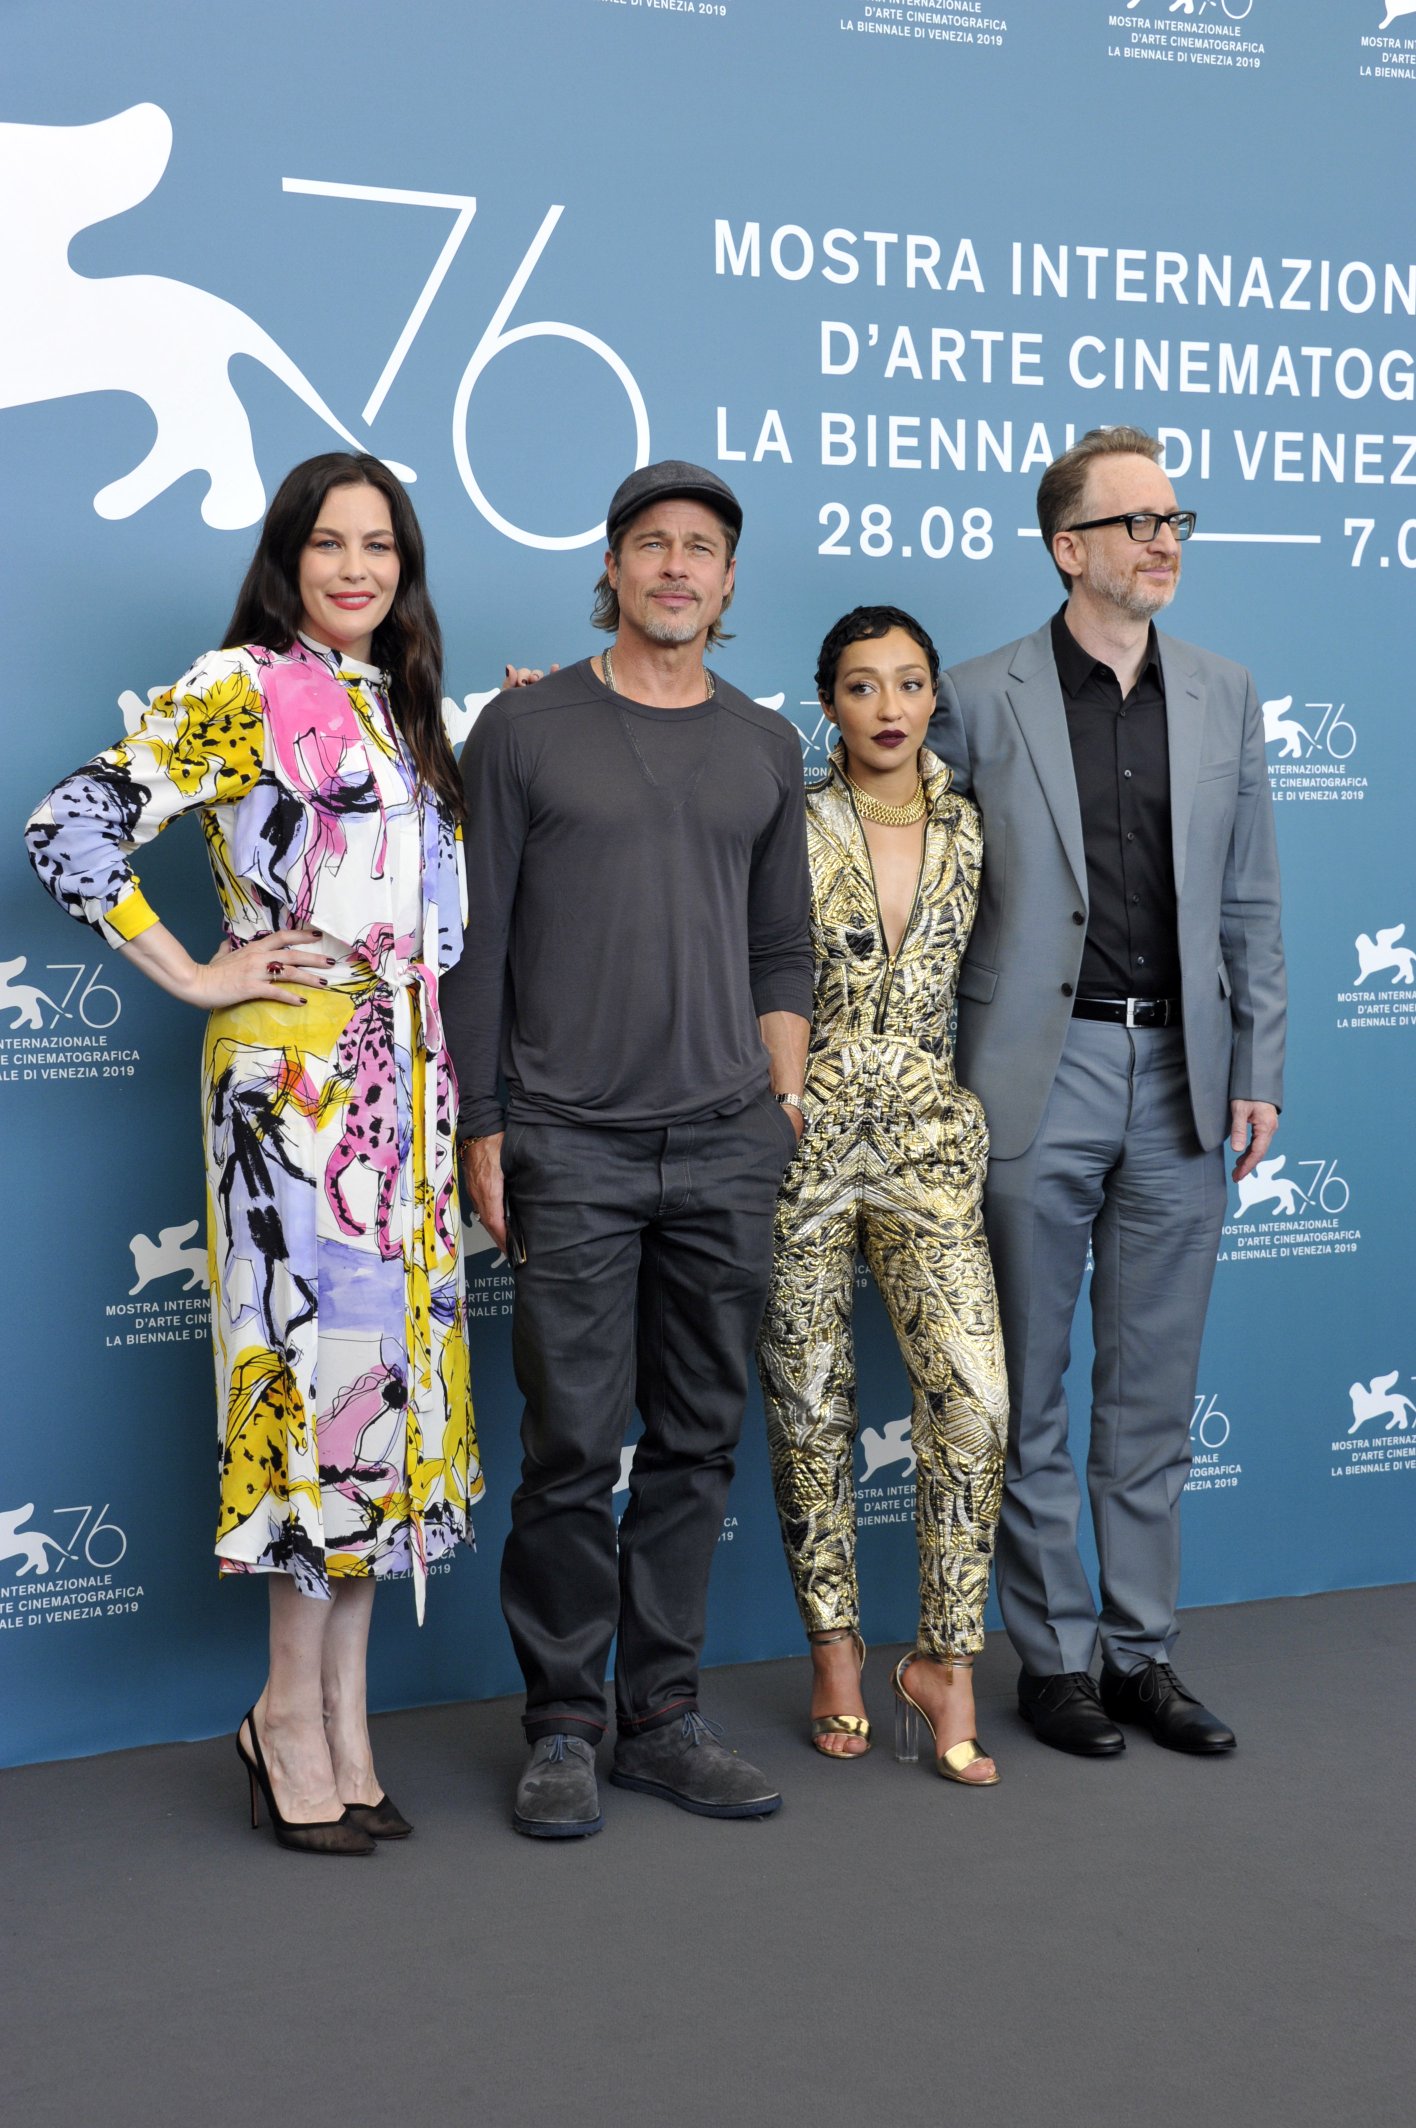 Ad Astra on Twitter: "The cast has arrived at the Venice Film Festival for  the World Premiere of #AdAstra https://t.co/plZwkmIgZt" / Twitter